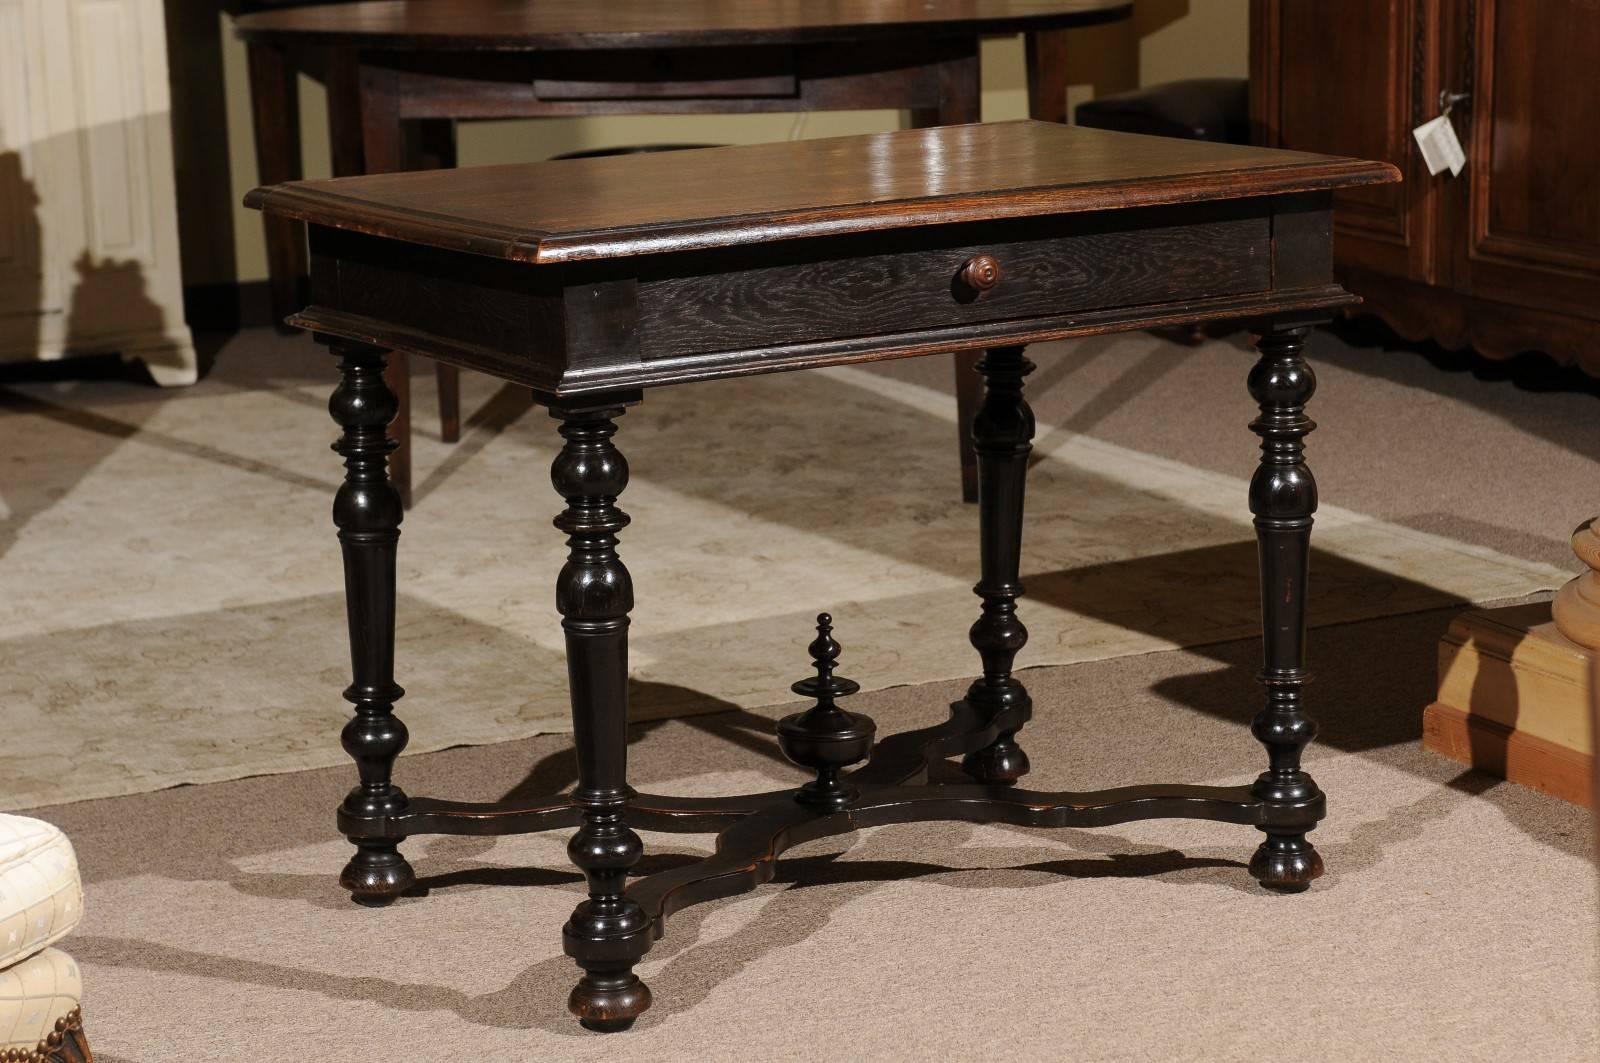 Louis XIII style tables are interesting with the turned legs and a stretcher. The dark oak has a wonderful patina and there is a handy middle drawer. This table has lots of Fine detailing around the top, the apron and of course the legs.